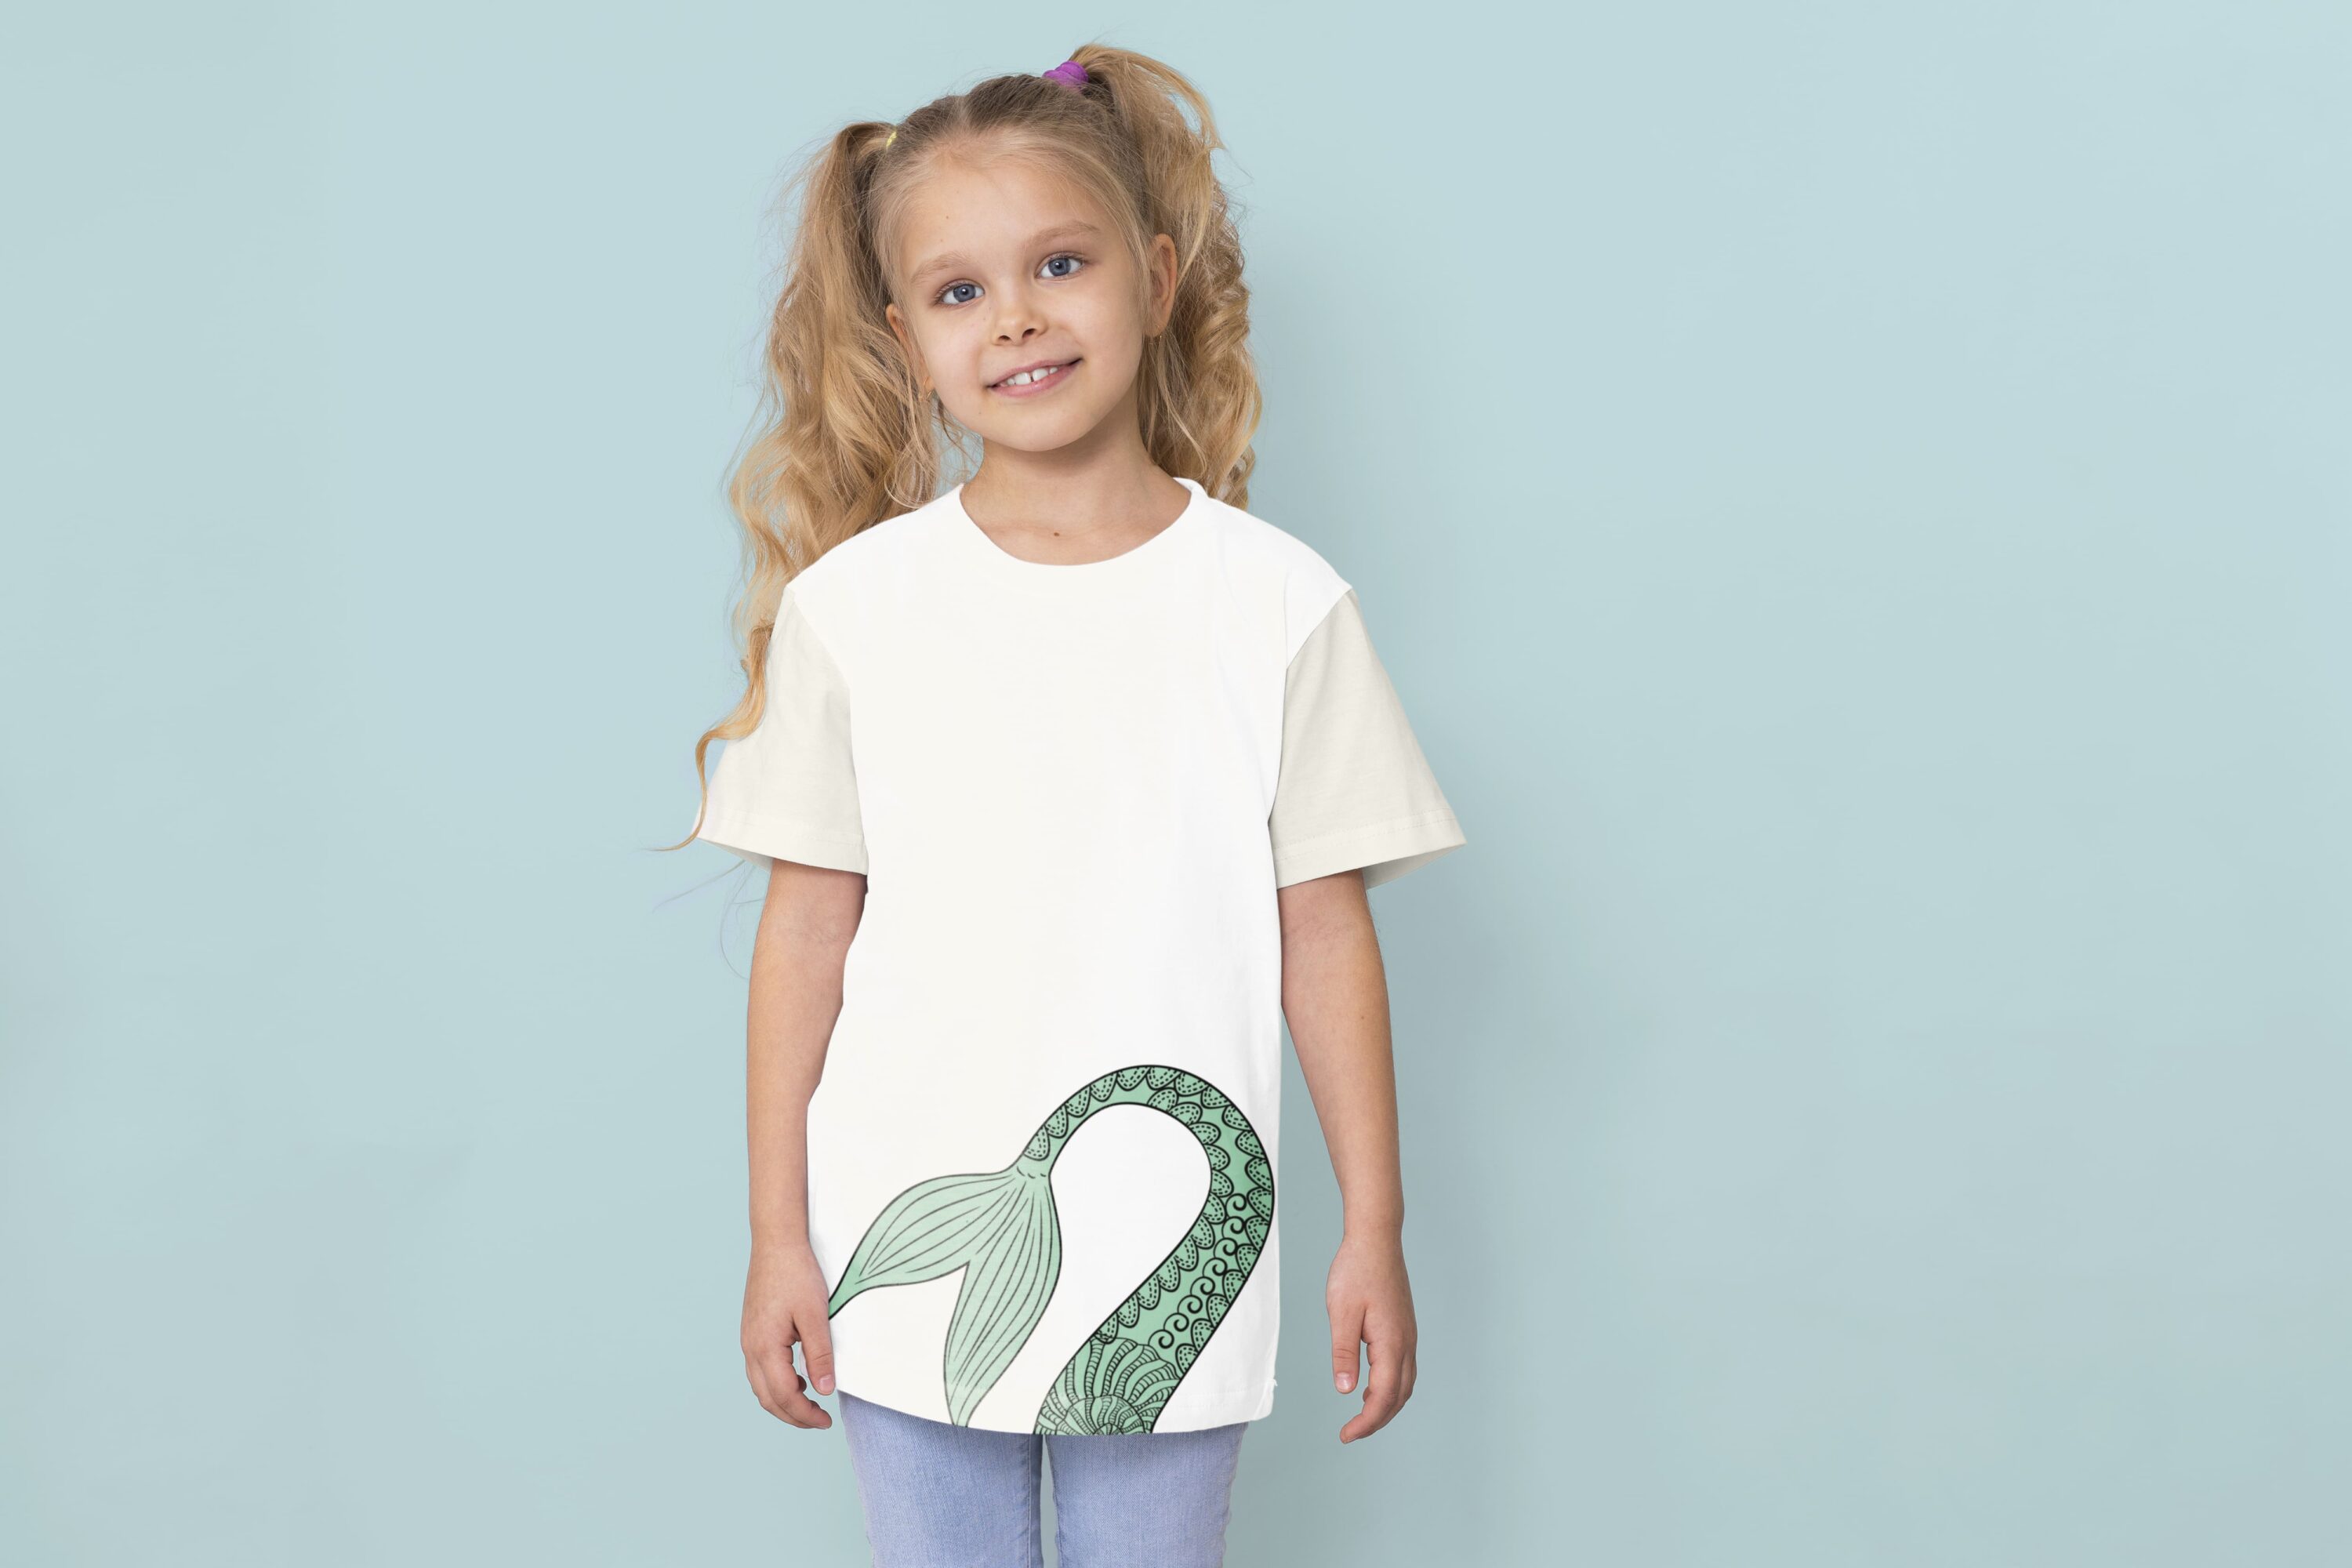 Delicate mermaid tail on the white t-shirt.